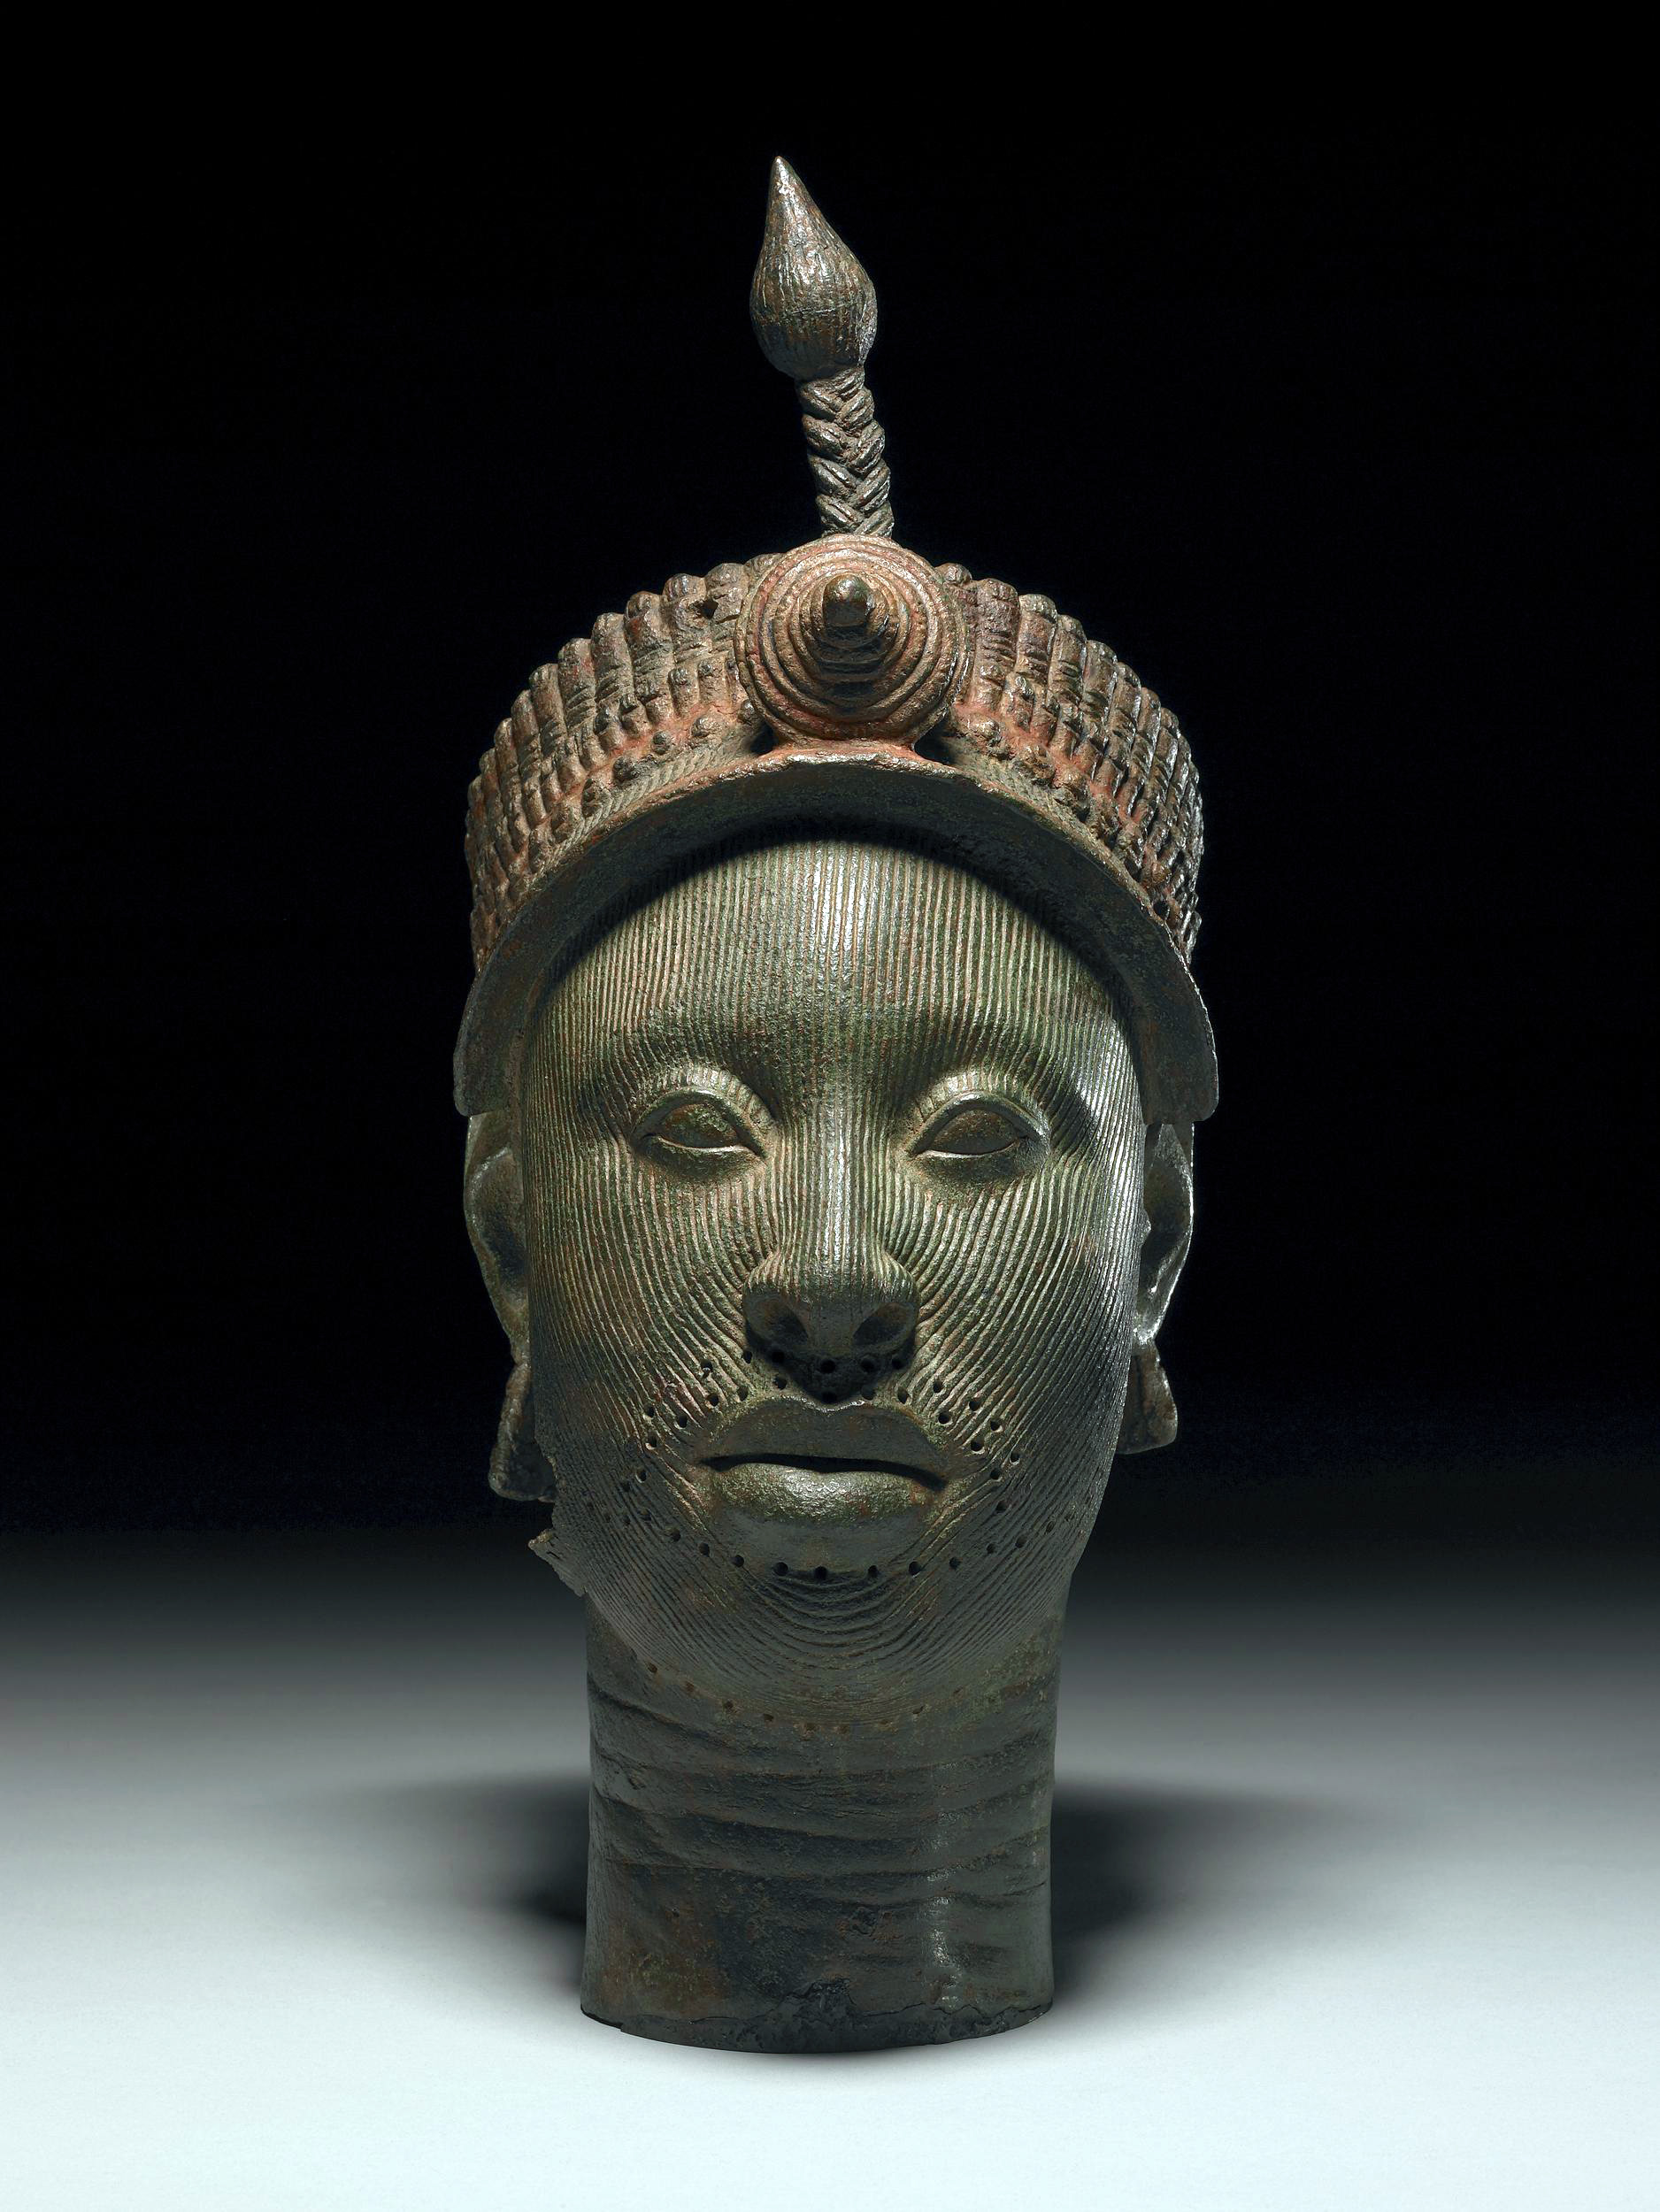 Ife head: Brass head of a ruler (Ori Olokun), 1300–1450, brass, made in Ife, 35 cm high (© Trustees of the British Museum)